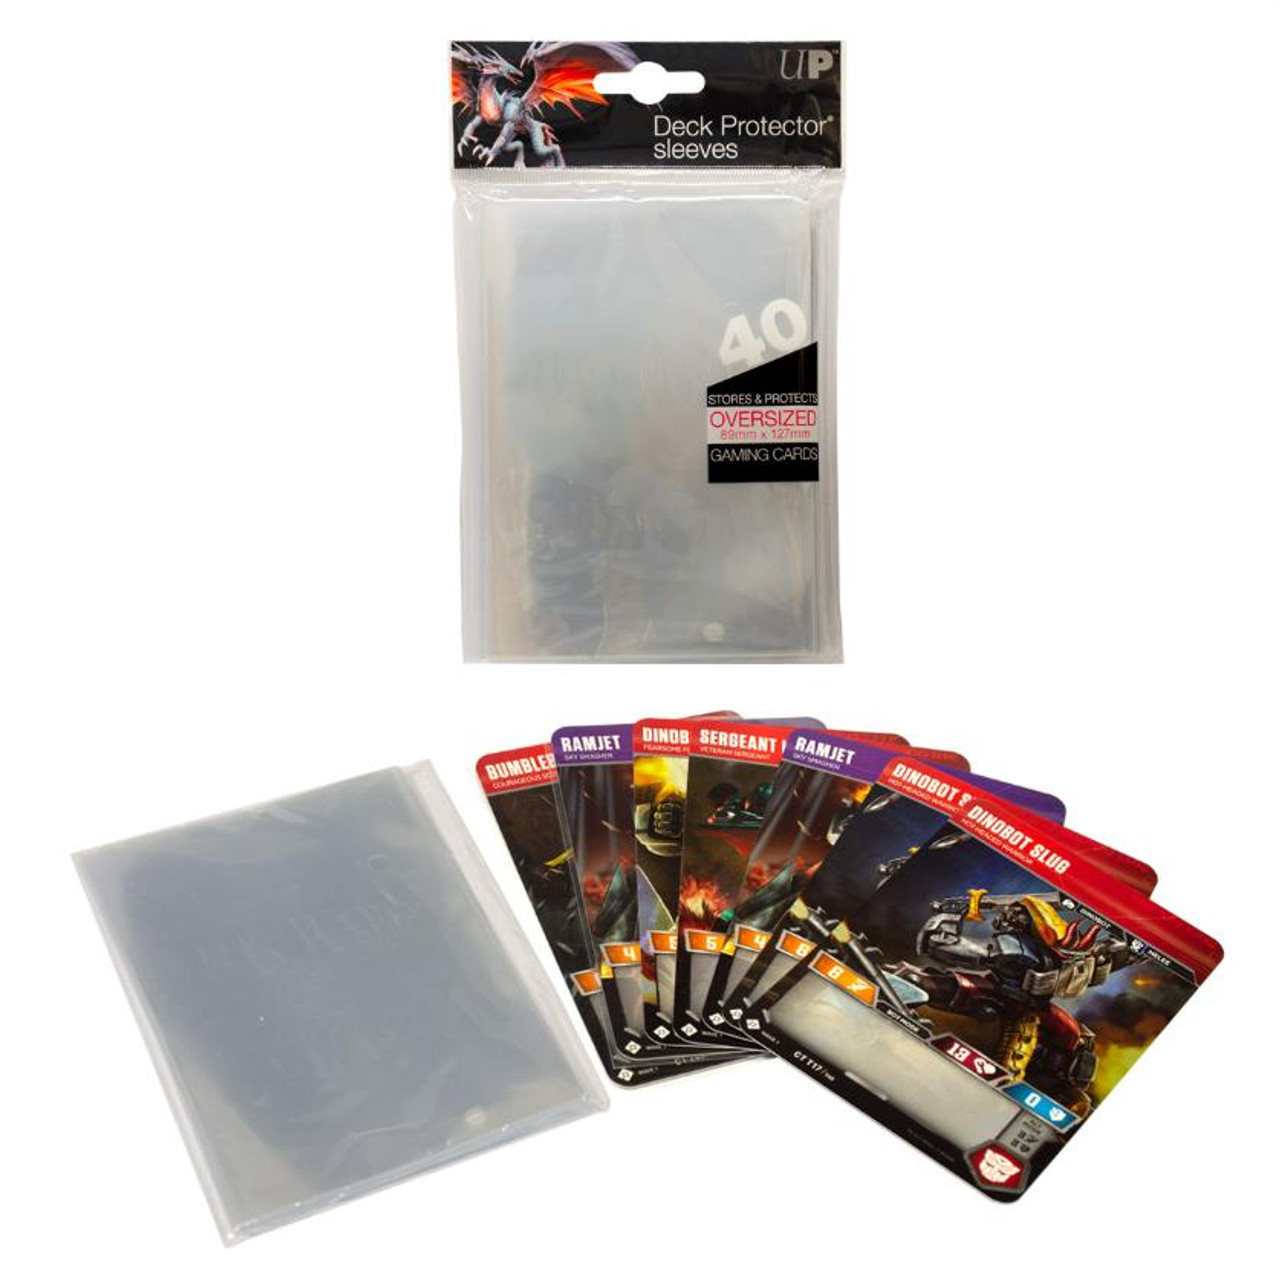 https://cdn11.bigcommerce.com/s-12zh048z64/images/stencil/1280x1280/products/1318/6927/ultra-pro-oversized-clear-deck-protector-sleeves-40-count-pack-89x127mm__42793.1662121155.jpg?c=2